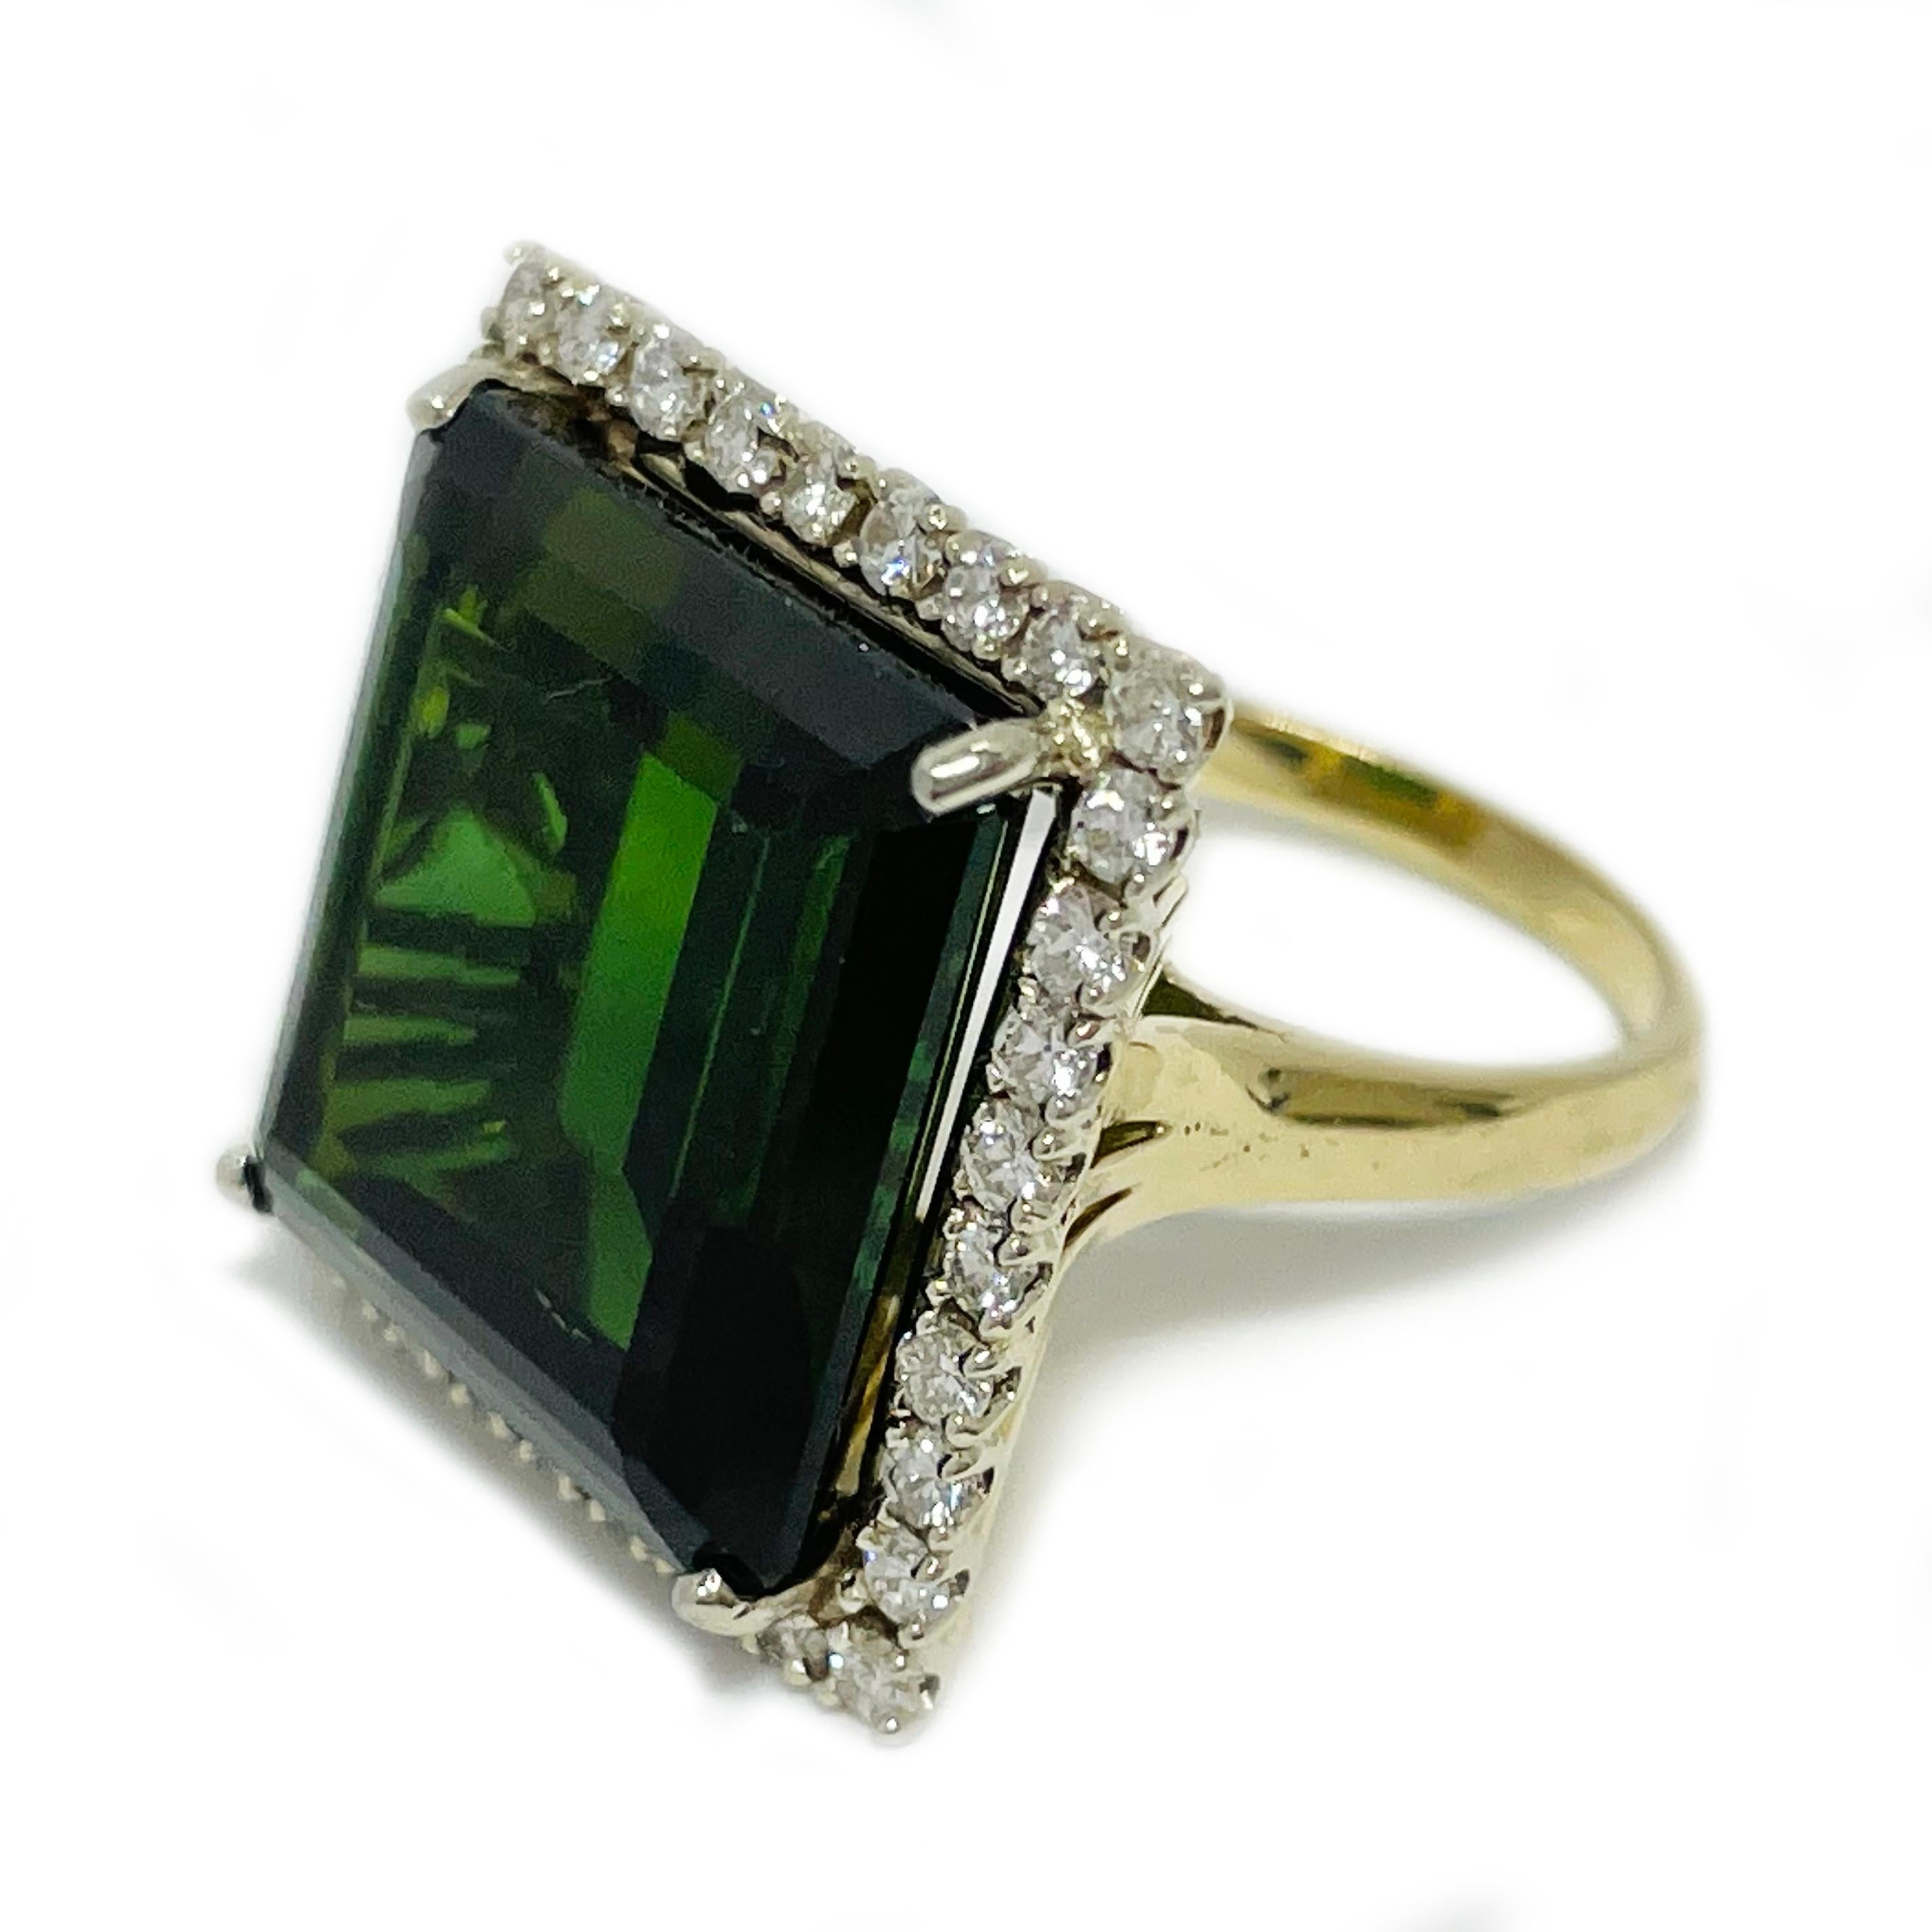 Tested 14 Karat Yellow Gold Green Tourmaline Diamond ring. The large cocktail ring features a 17 x 16.7 x 9.01mm step-cut Tourmaline with a halo of thirty-four round brilliant-cut 2mm diamonds. The medium to dark green tourmaline has a total carat